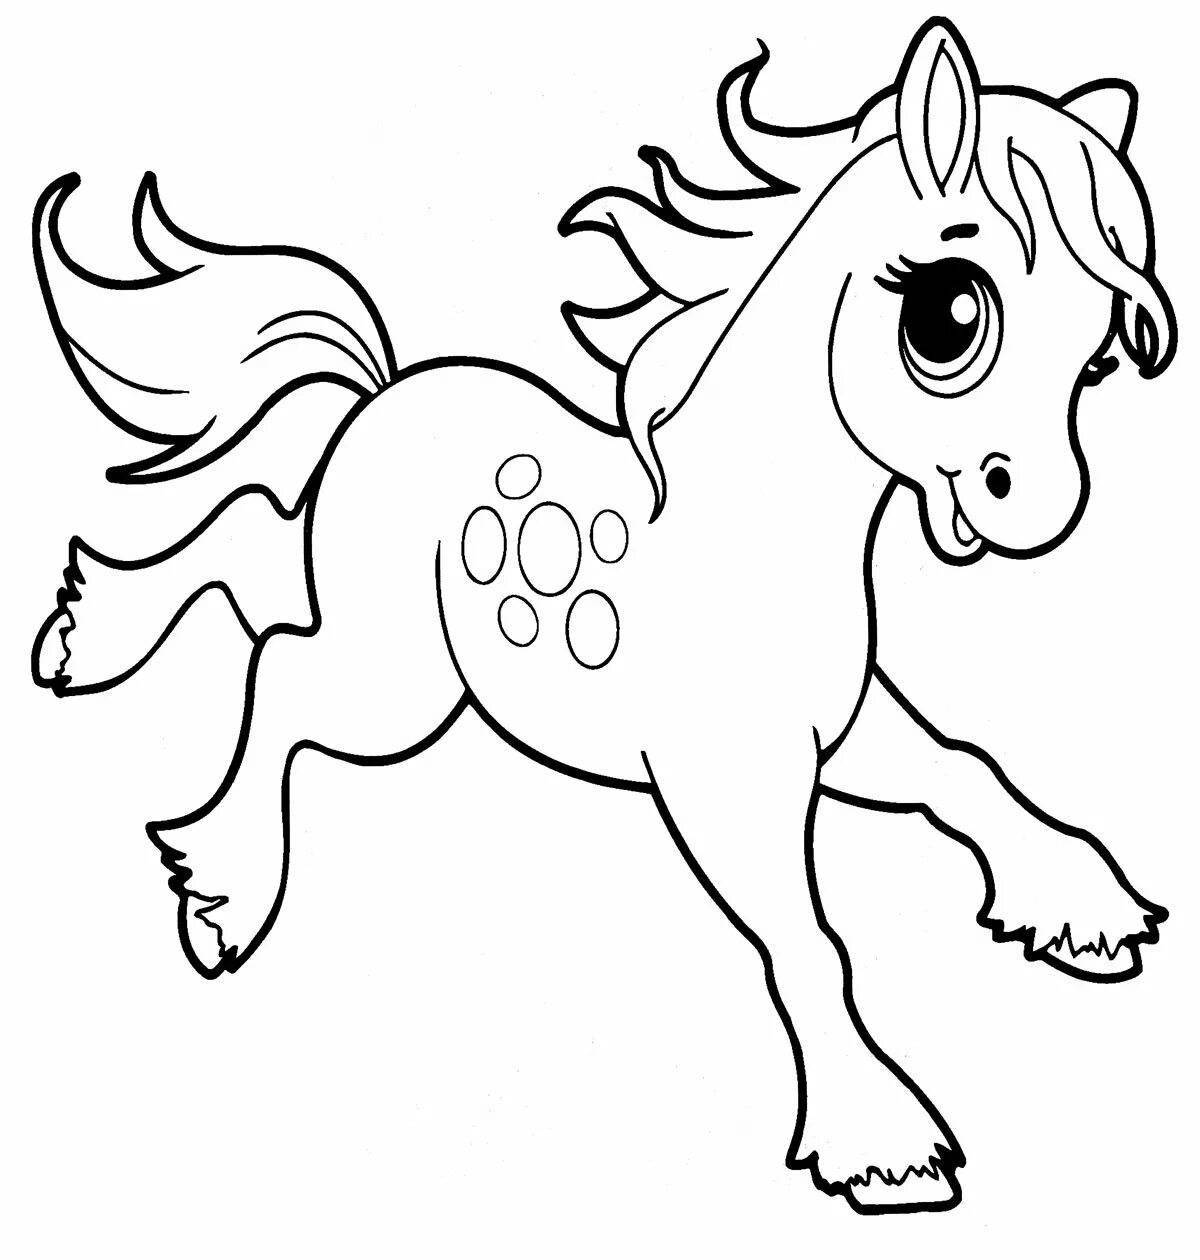 Colorful ygggo coloring page